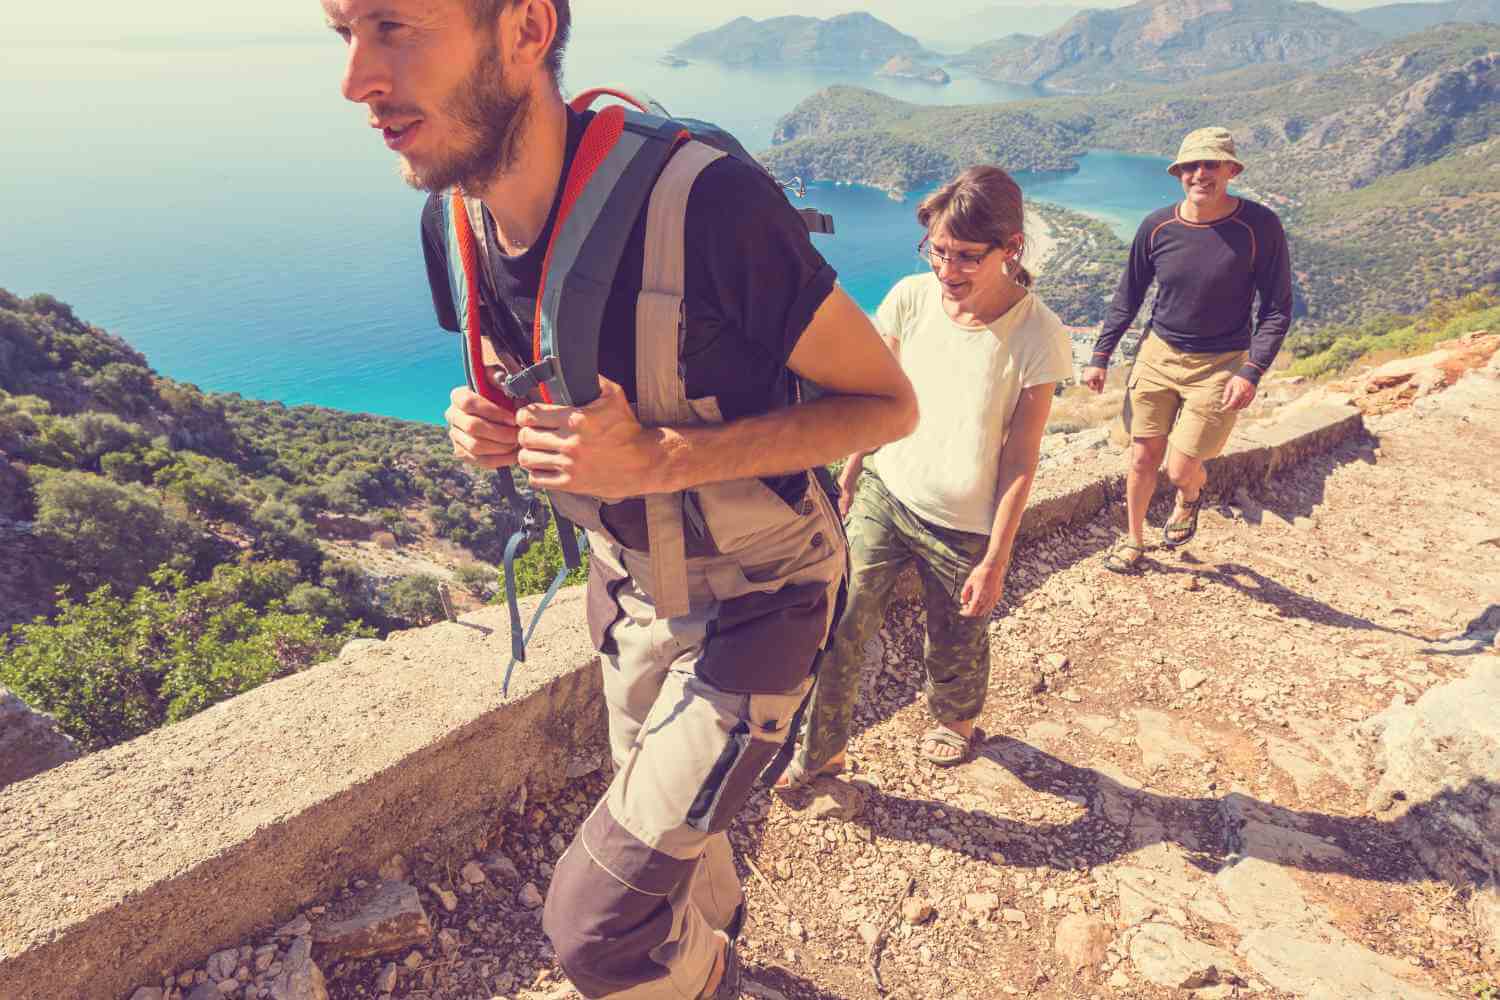 Lycian Way Walking Tour; Price includes Meals, Guide, Transport, Accommodation Book Guided Lycian Way Trekking Tour with us, a powerful journey to one of the world's magnificent trails in Turkey. Lycian Way, rated as one of the world's magnificent trails. You will appreciate the scenery of this part of Turkey that is impracticable to do from inside a vehicle. Regardless of the level, you are on, a casual walker or a professional one, this powerful journey will appeal to those looking for a healthier way to acknowledge grand scenery. You will walk through across flower-filled fields, pine forests and olive groves, wave to shepherds, then relax in simple, picturesque accommodation along the coast. This is an experience at its simplest and most pure. Our Lycian Trekking Excursion consists of two parts: You will witness the most beautiful archaeological sites and spectacular beauty of the landscape along the Lycian route.